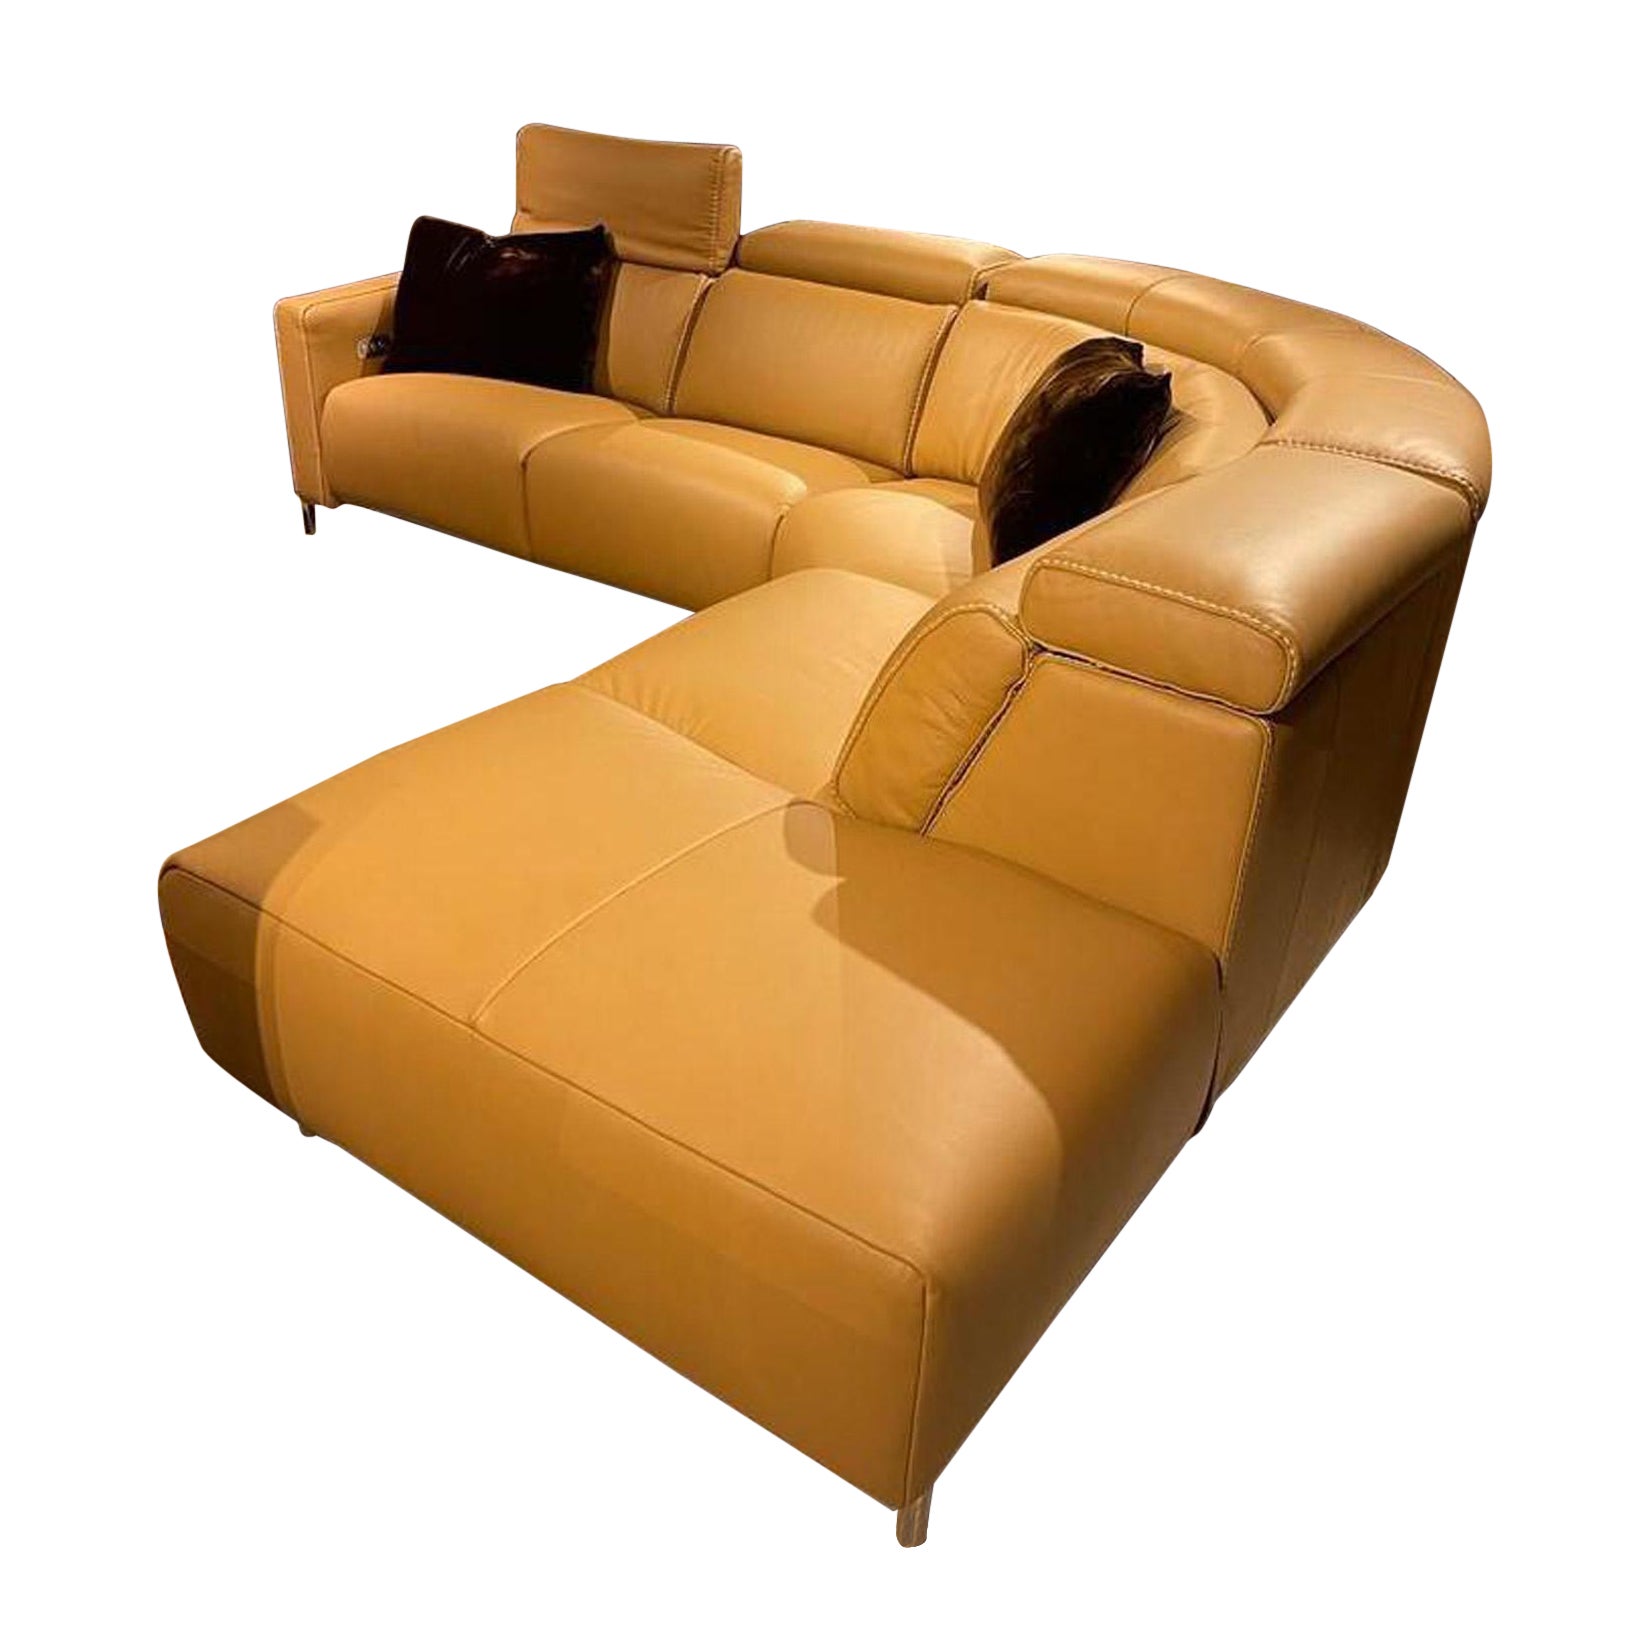 Fellini Italian Leather Sectional Sofa with 3 Reclining Seats For Sale